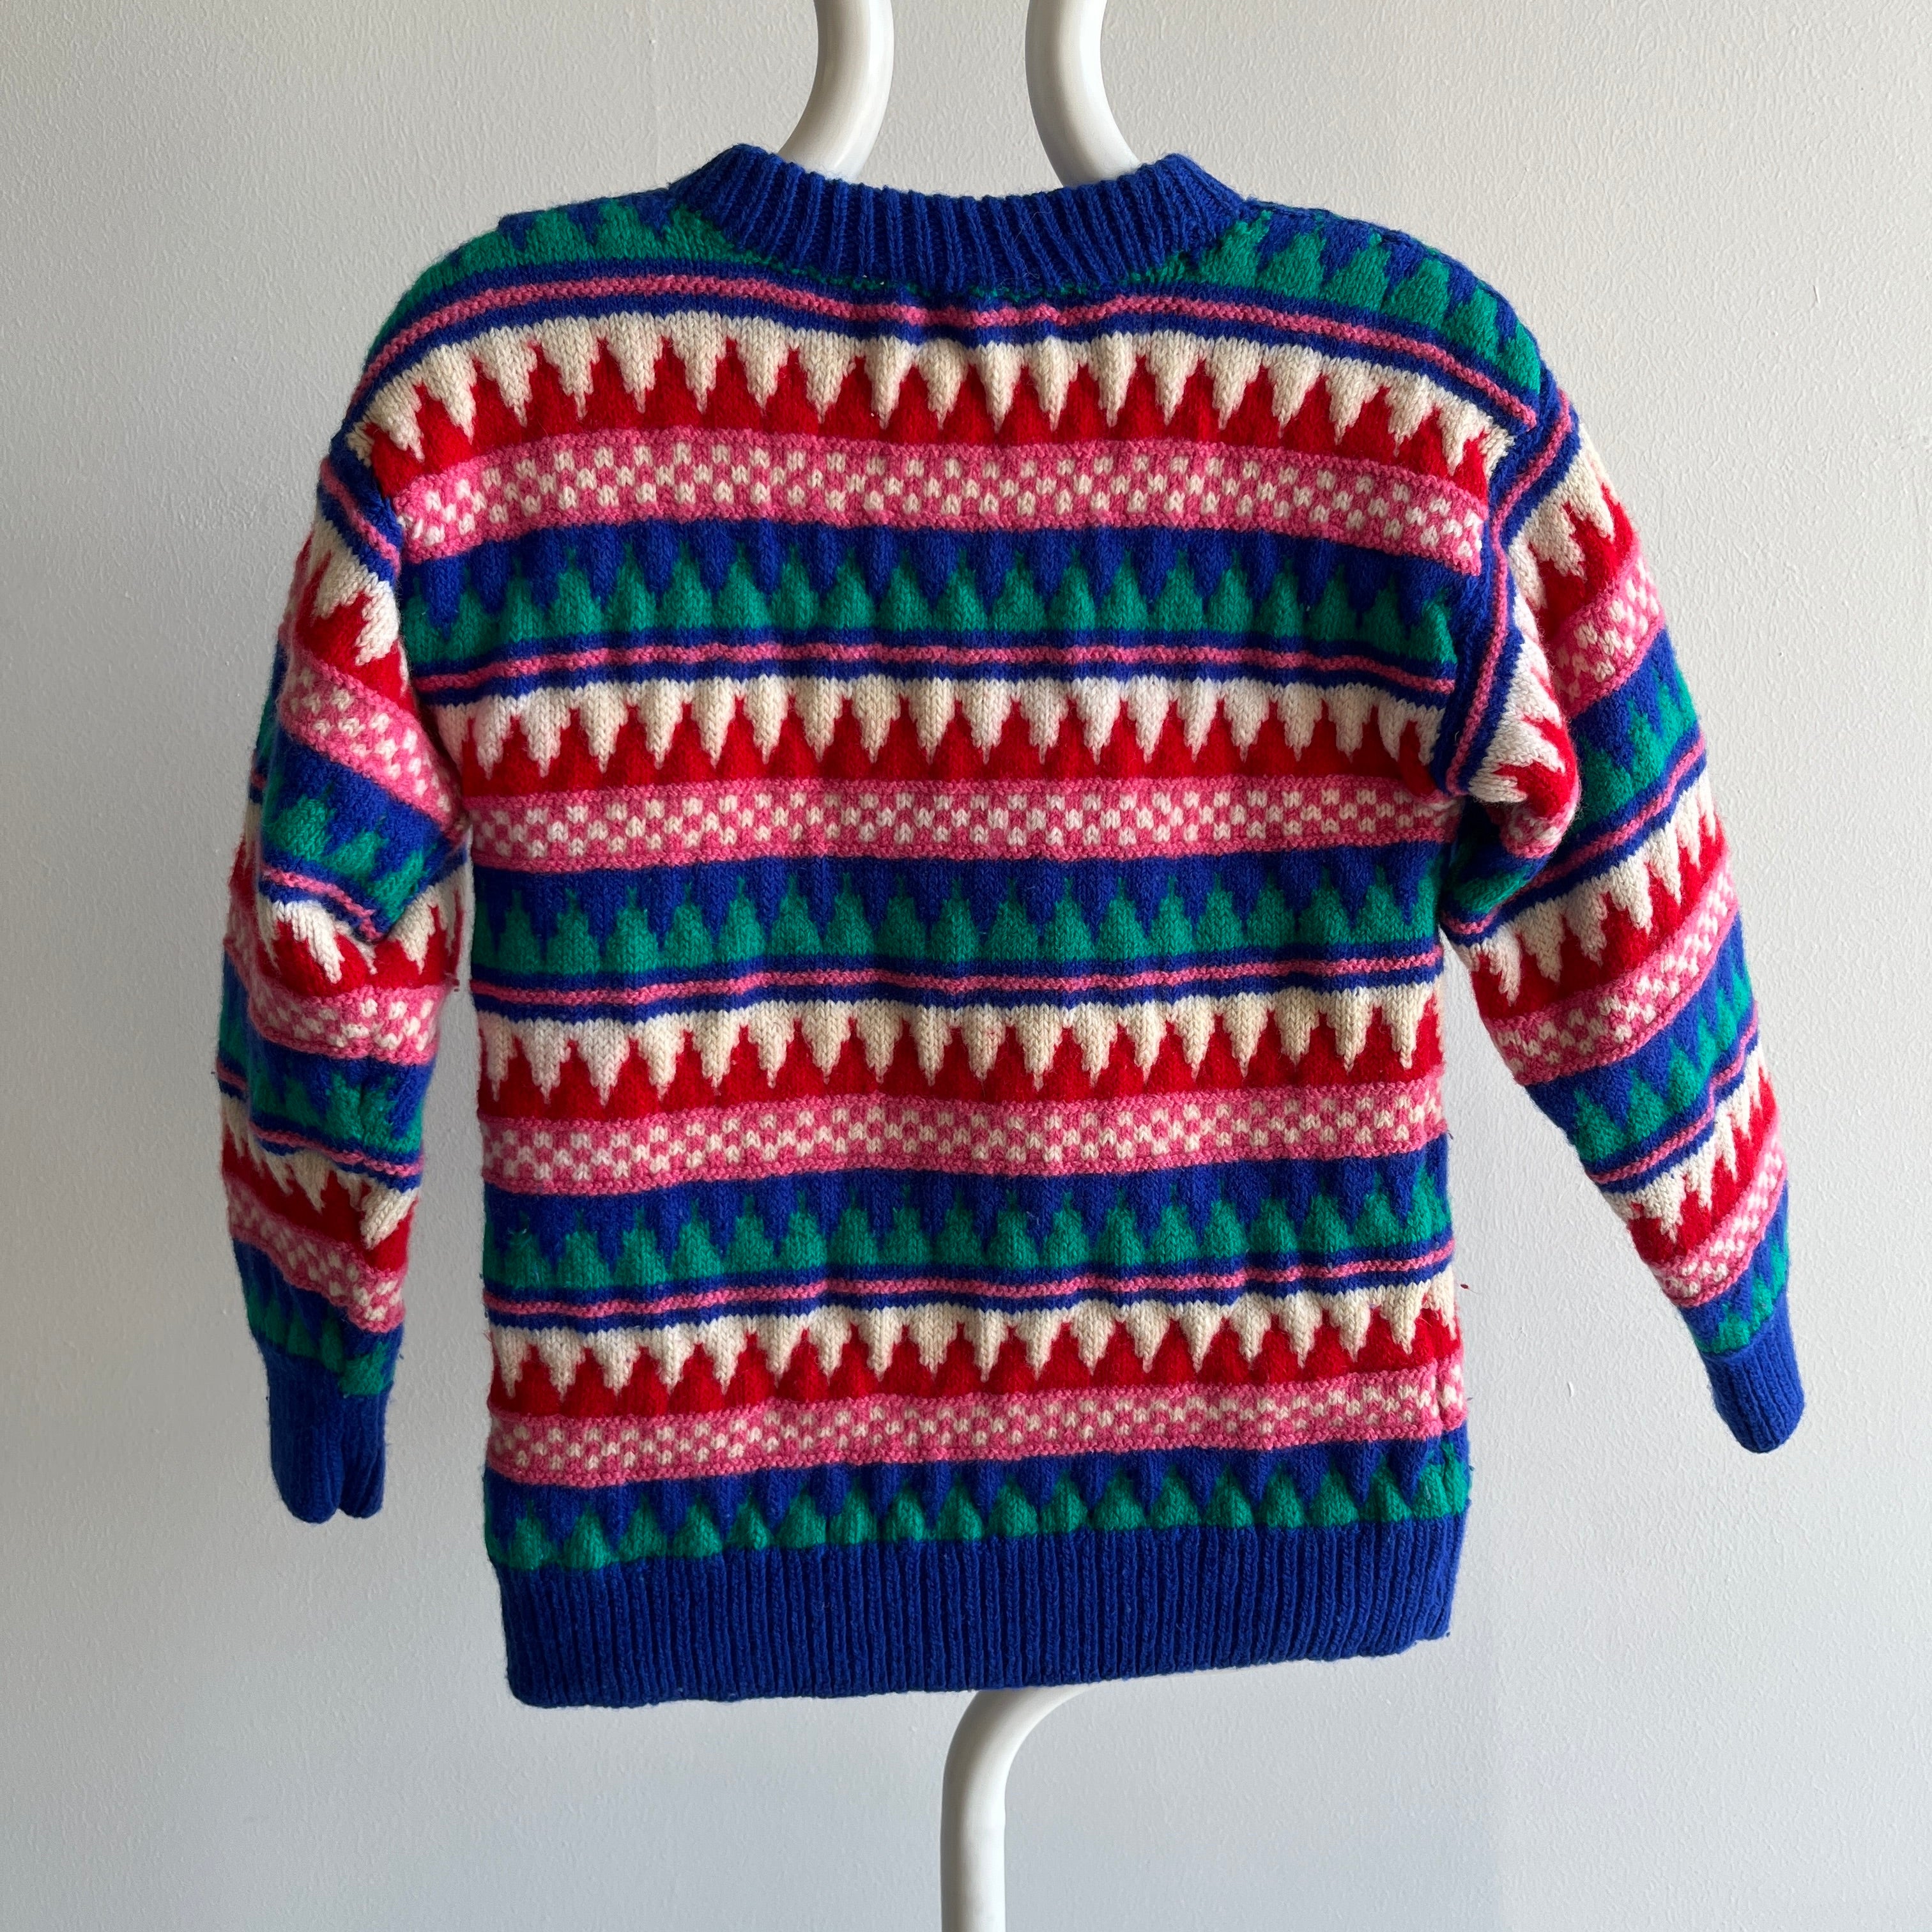 1980s Hand Knit Colorful Wool Sweater - WOW